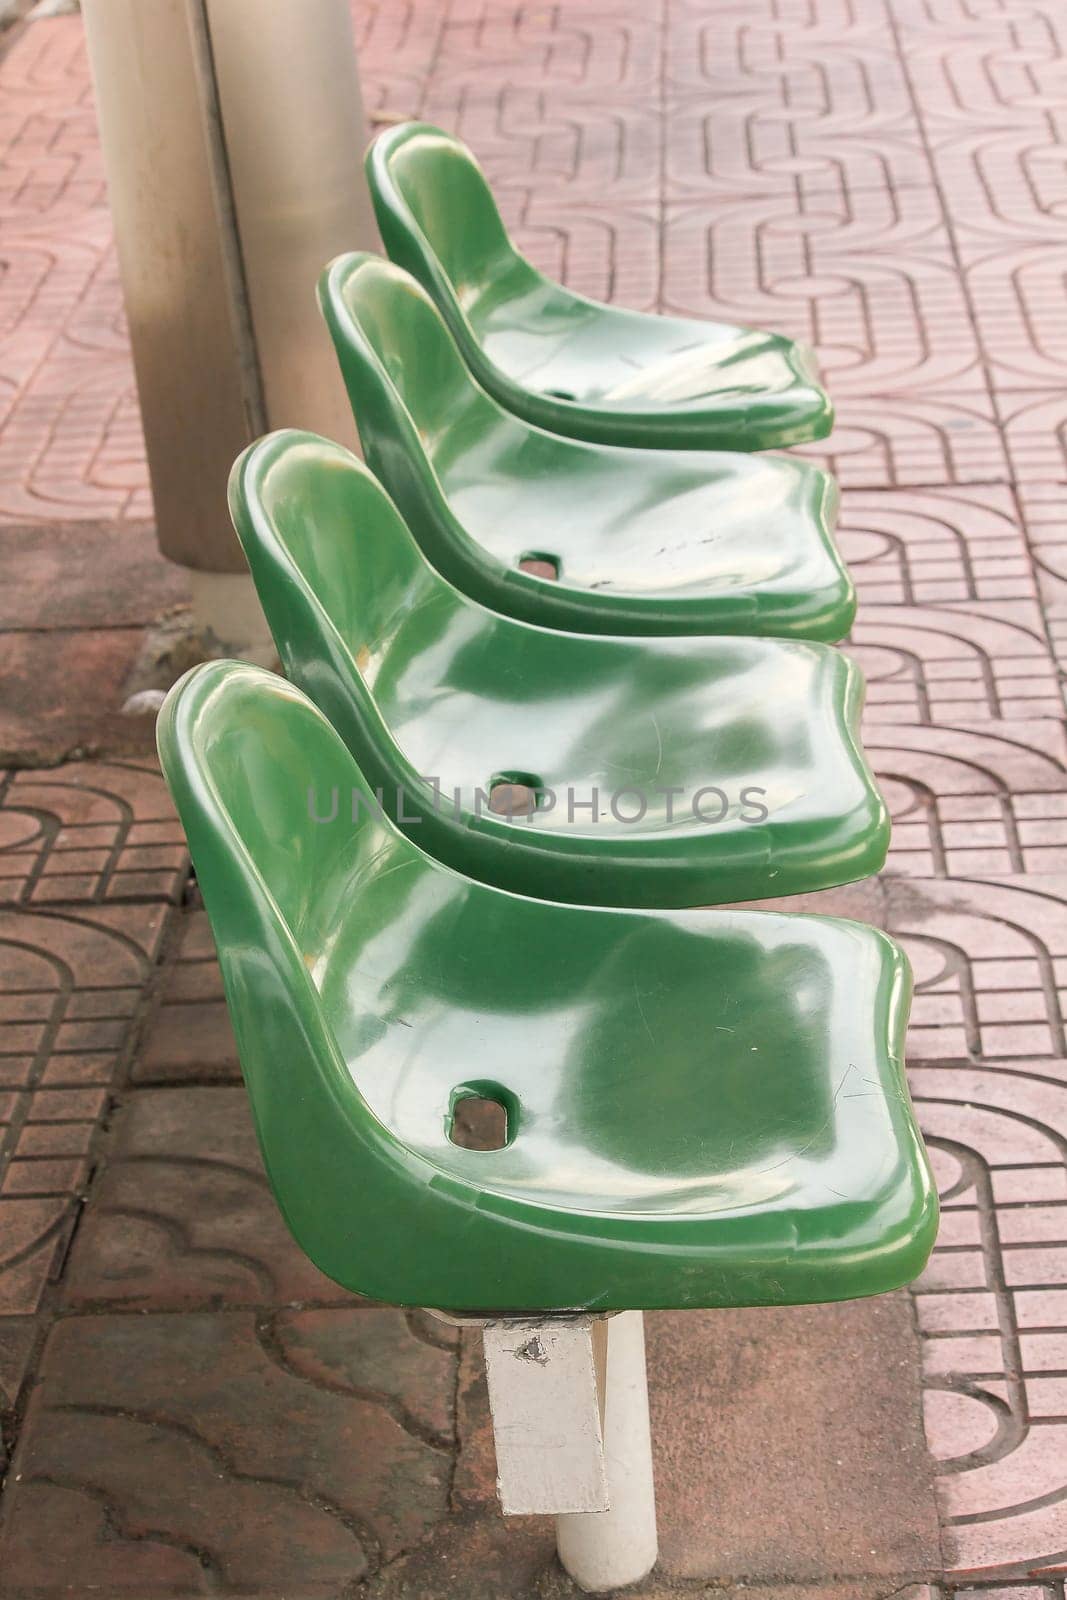 Green plastic chair at the bus stop For passengers waiting